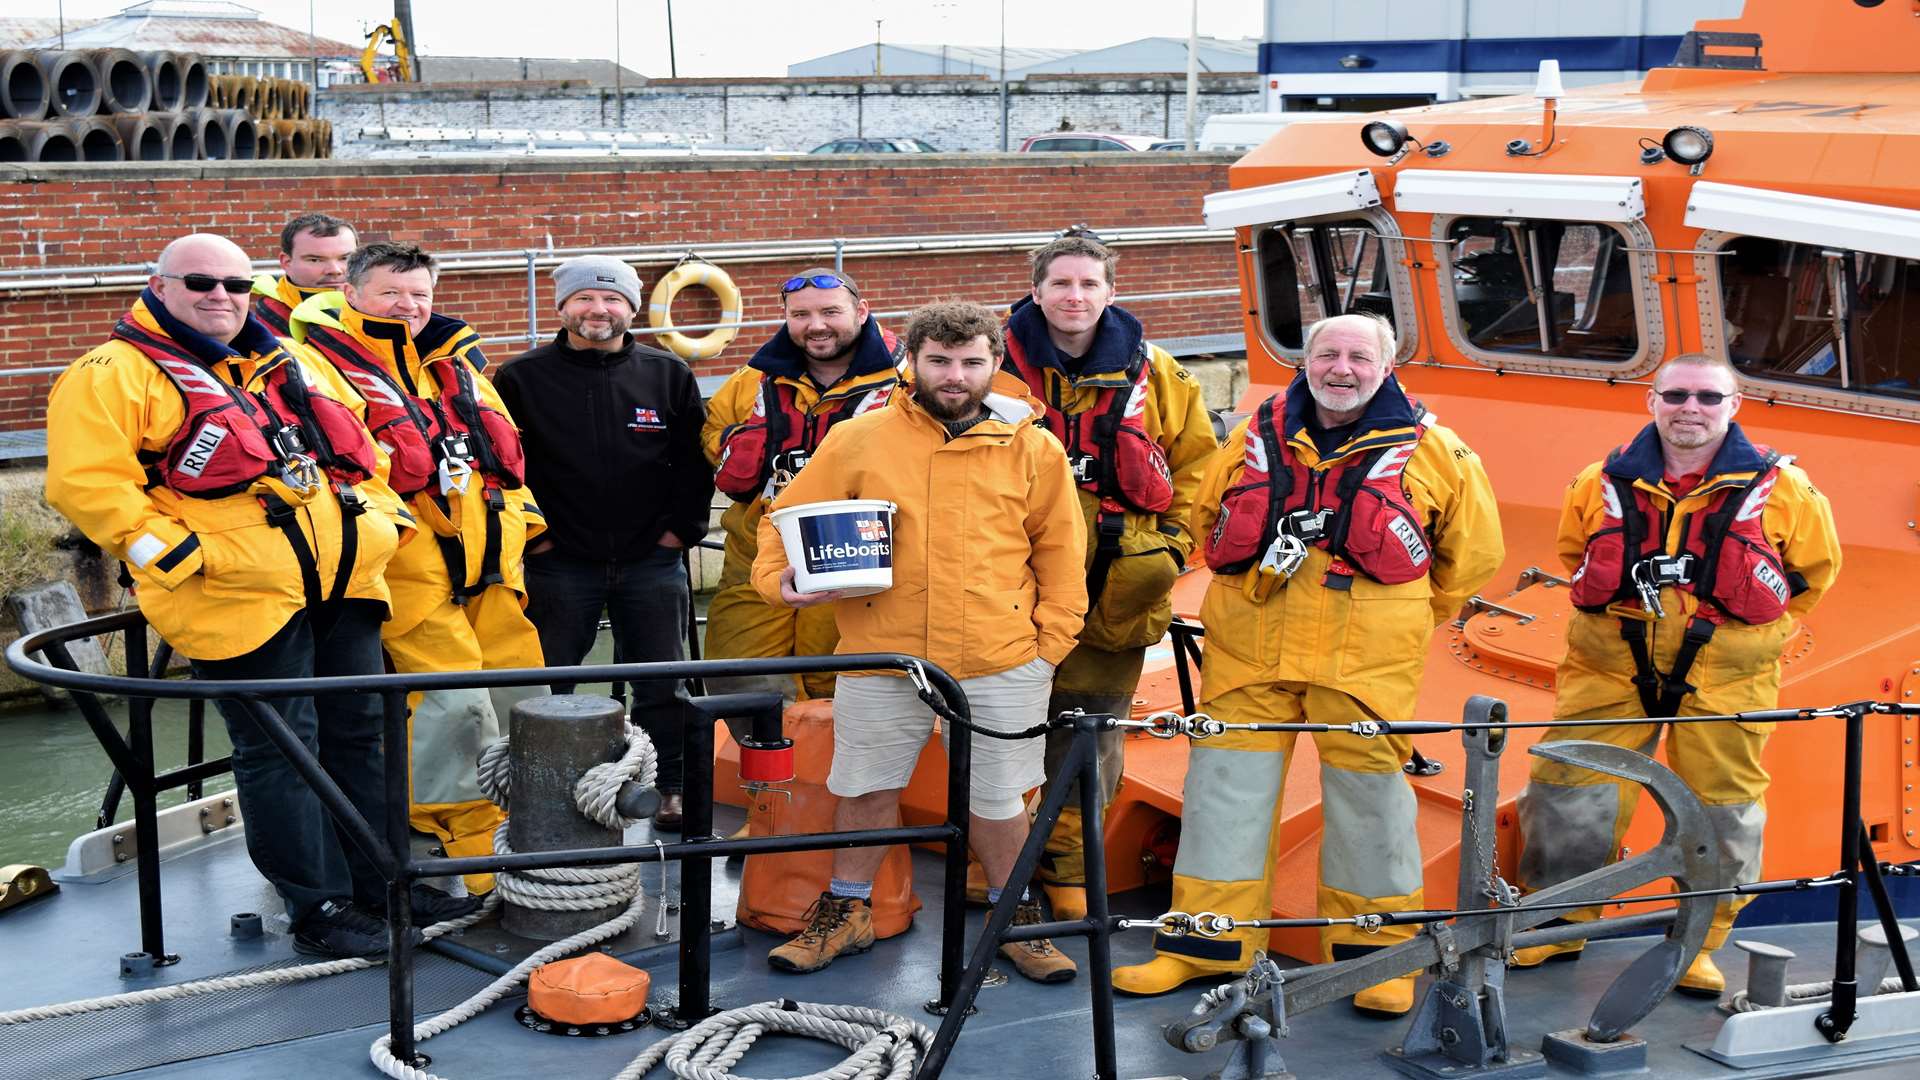 Alex Ellis-Roswell with the Sheerness RNLI crew